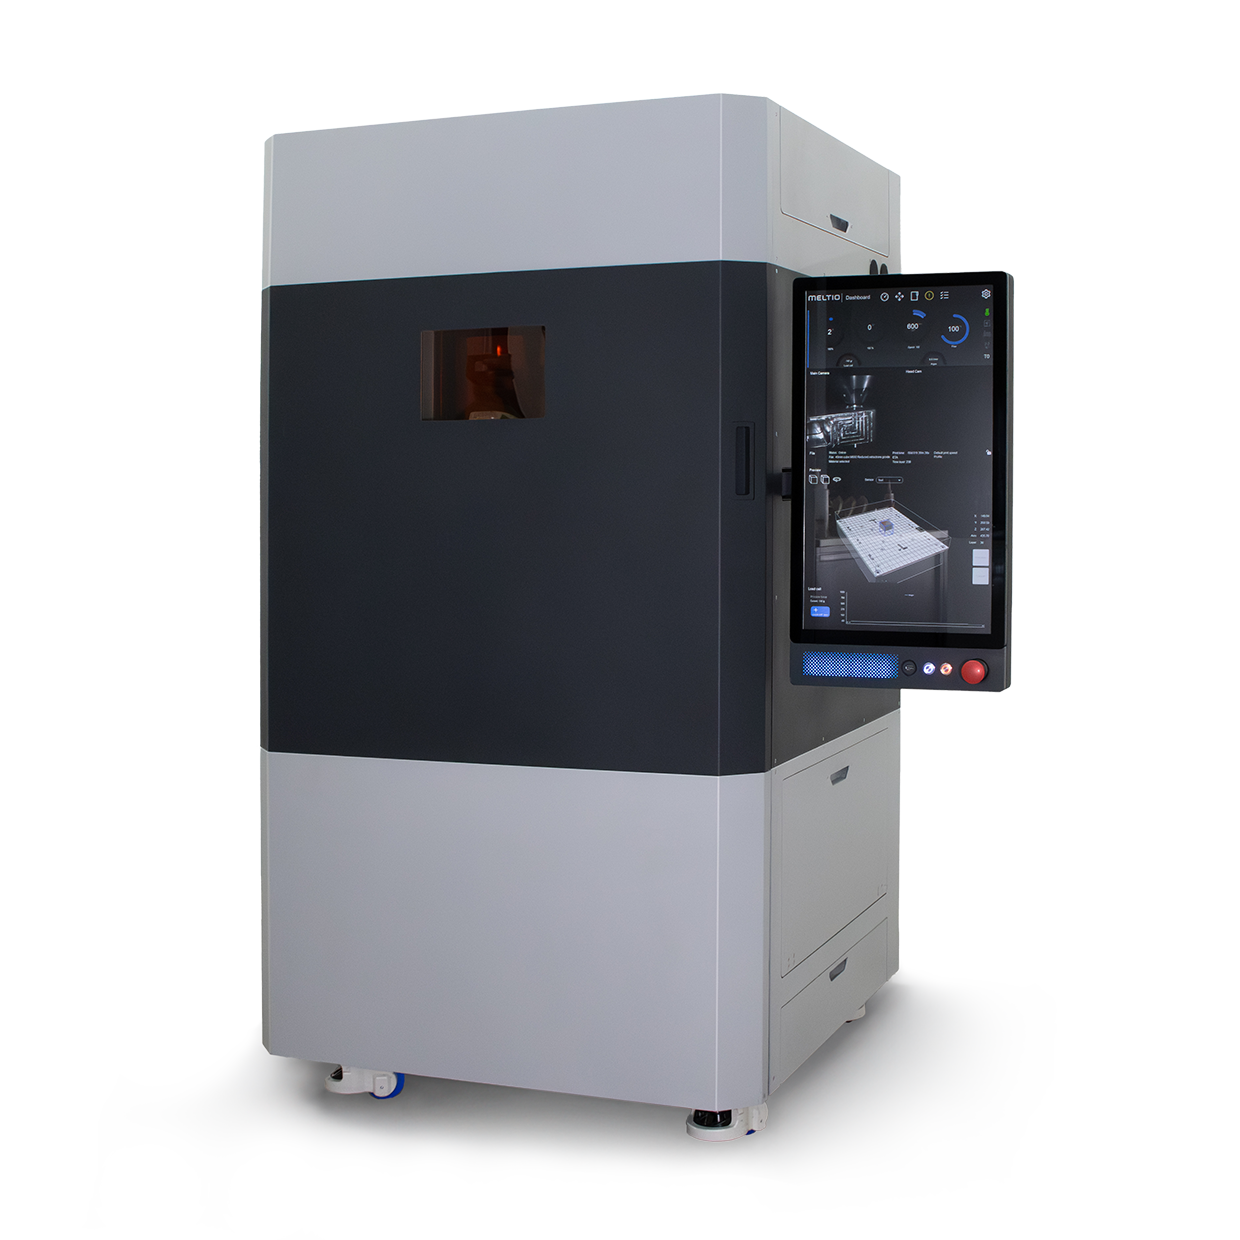 Introducing the Meltio M600: The Next Step in Metal Industrial Printing